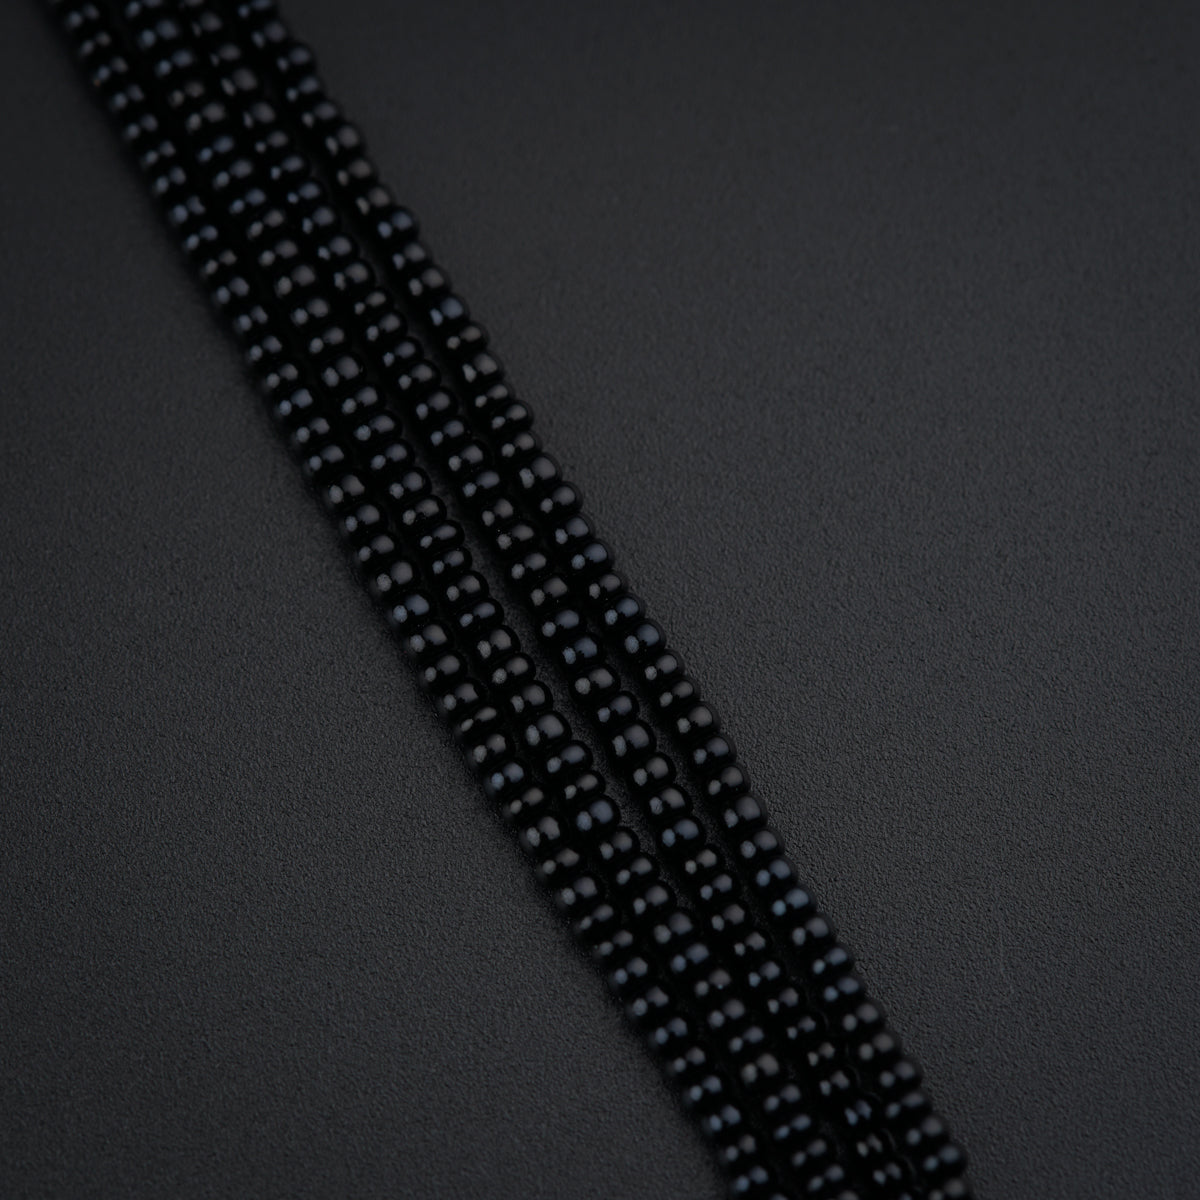 three strands of black beads on a black surface